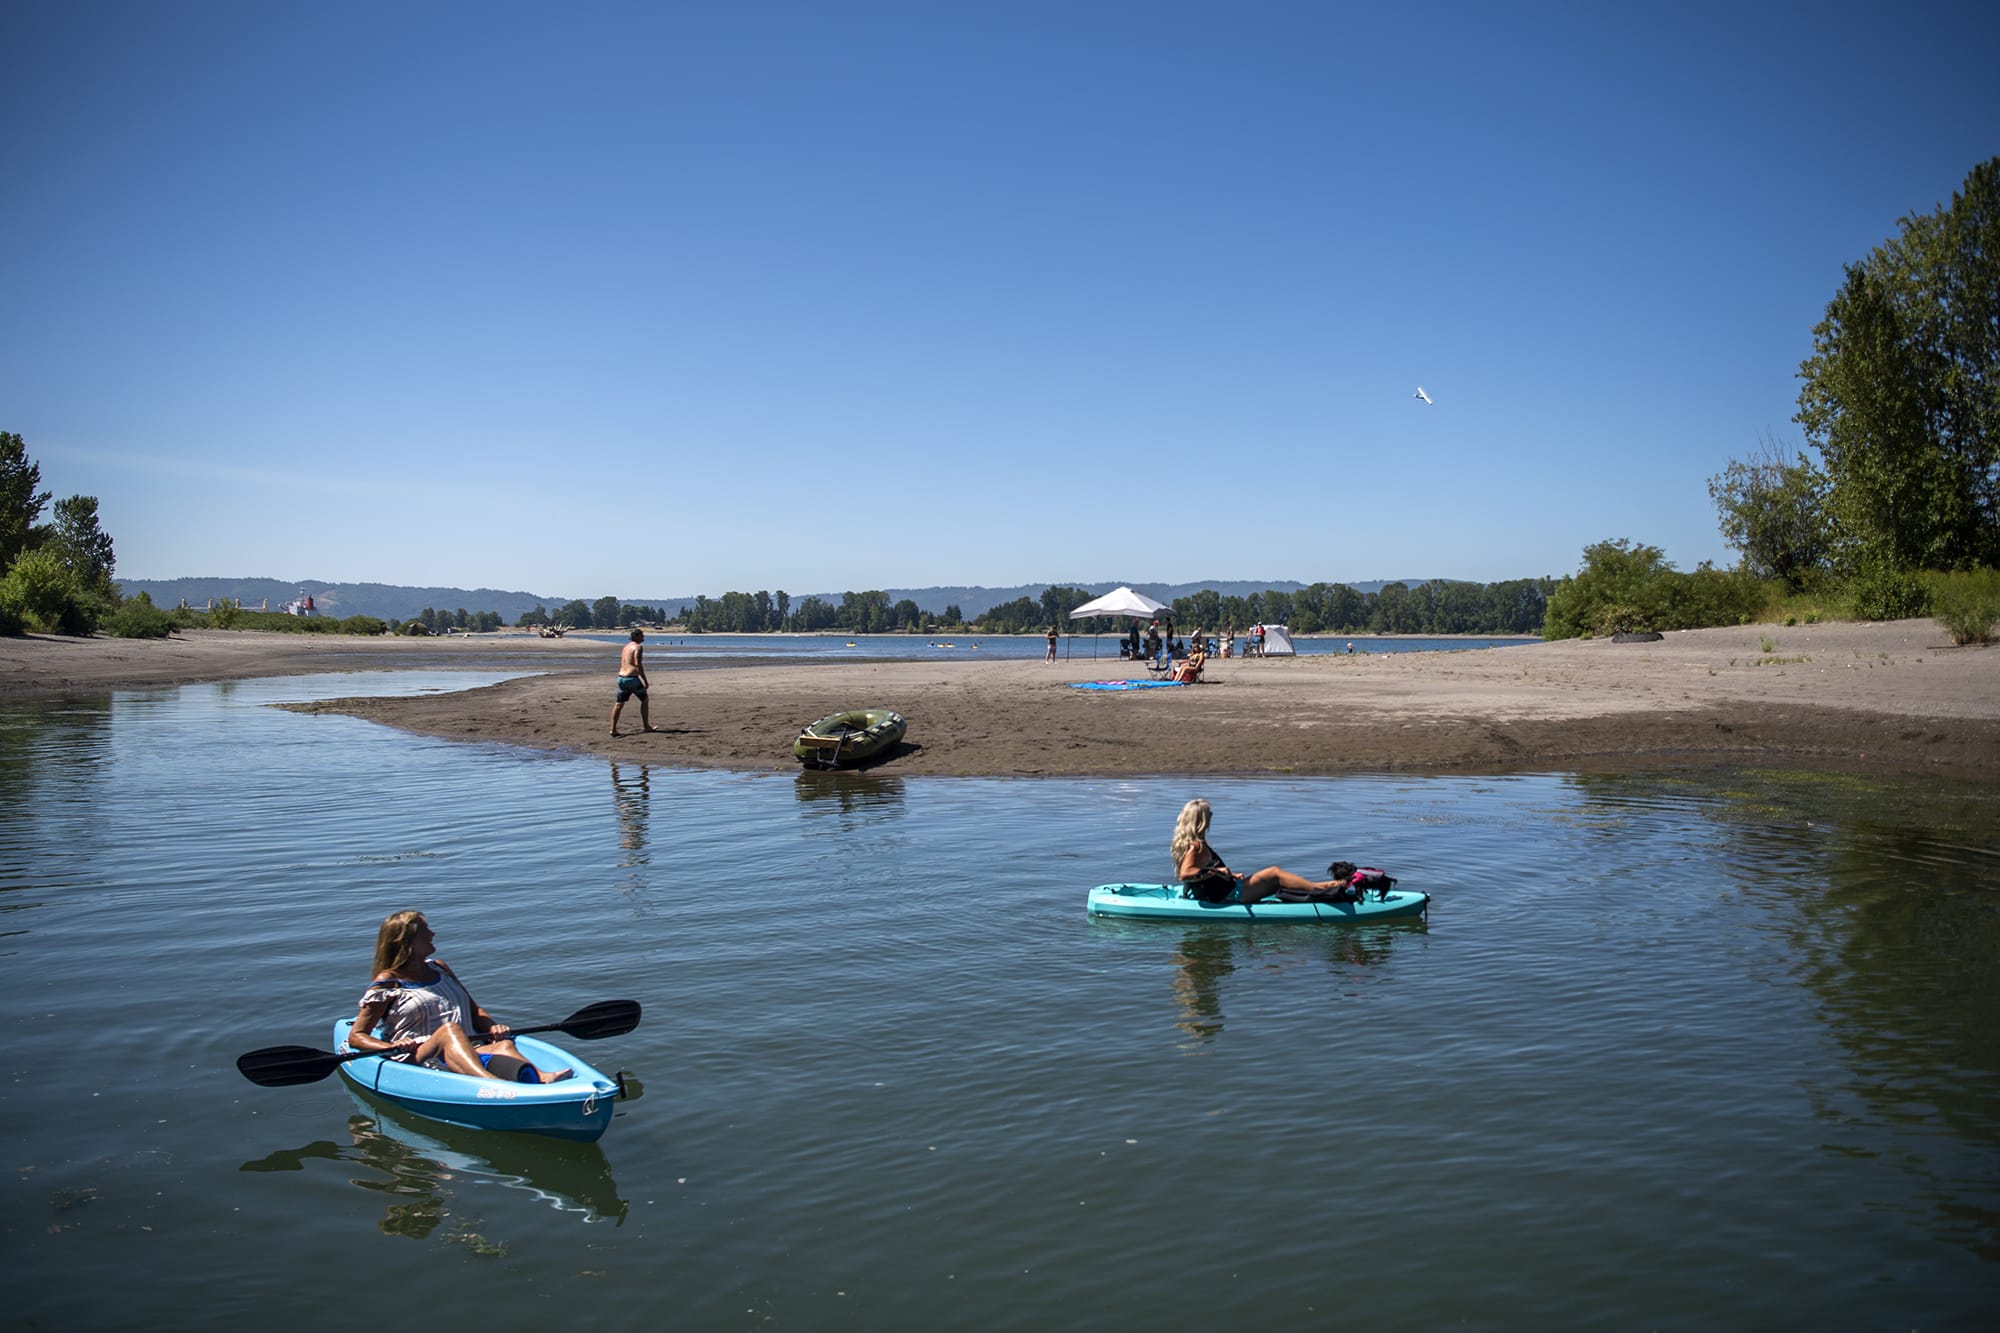 Bev Kadow, left, and her friend Kelly Kopp, right, watch an airplane fly above as they kayak along an offshoot of the Columbia River in Vancouver on August 15, 2020. An excessive heat warning has been issued throughout the weekend until Sunday evening, with temperatures around 100 degrees.